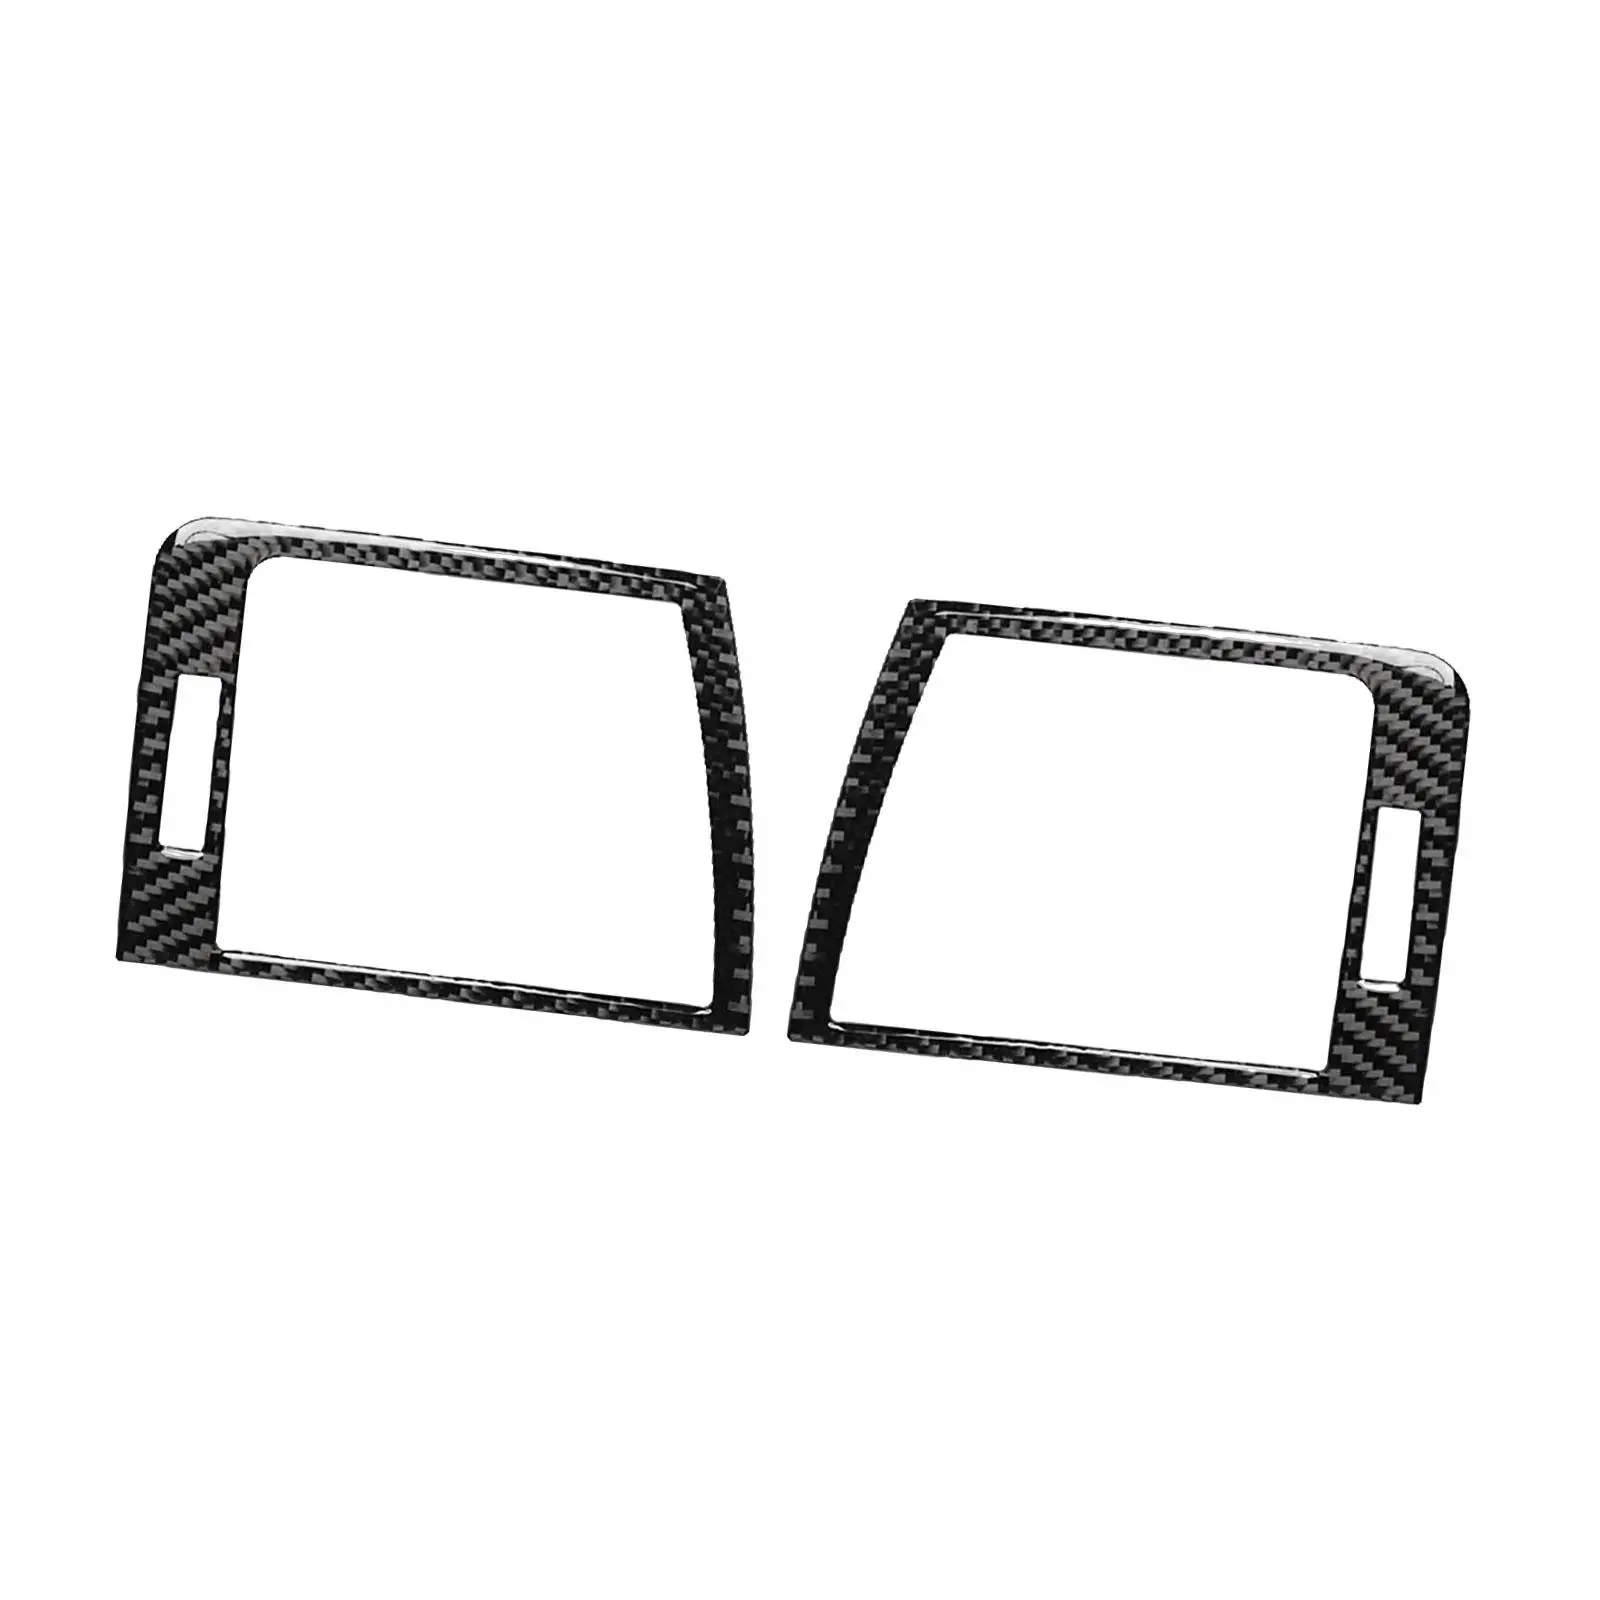 2x Vehicle Dashboard Air Vent trim cover for BMW 3 Series E46 Accessory